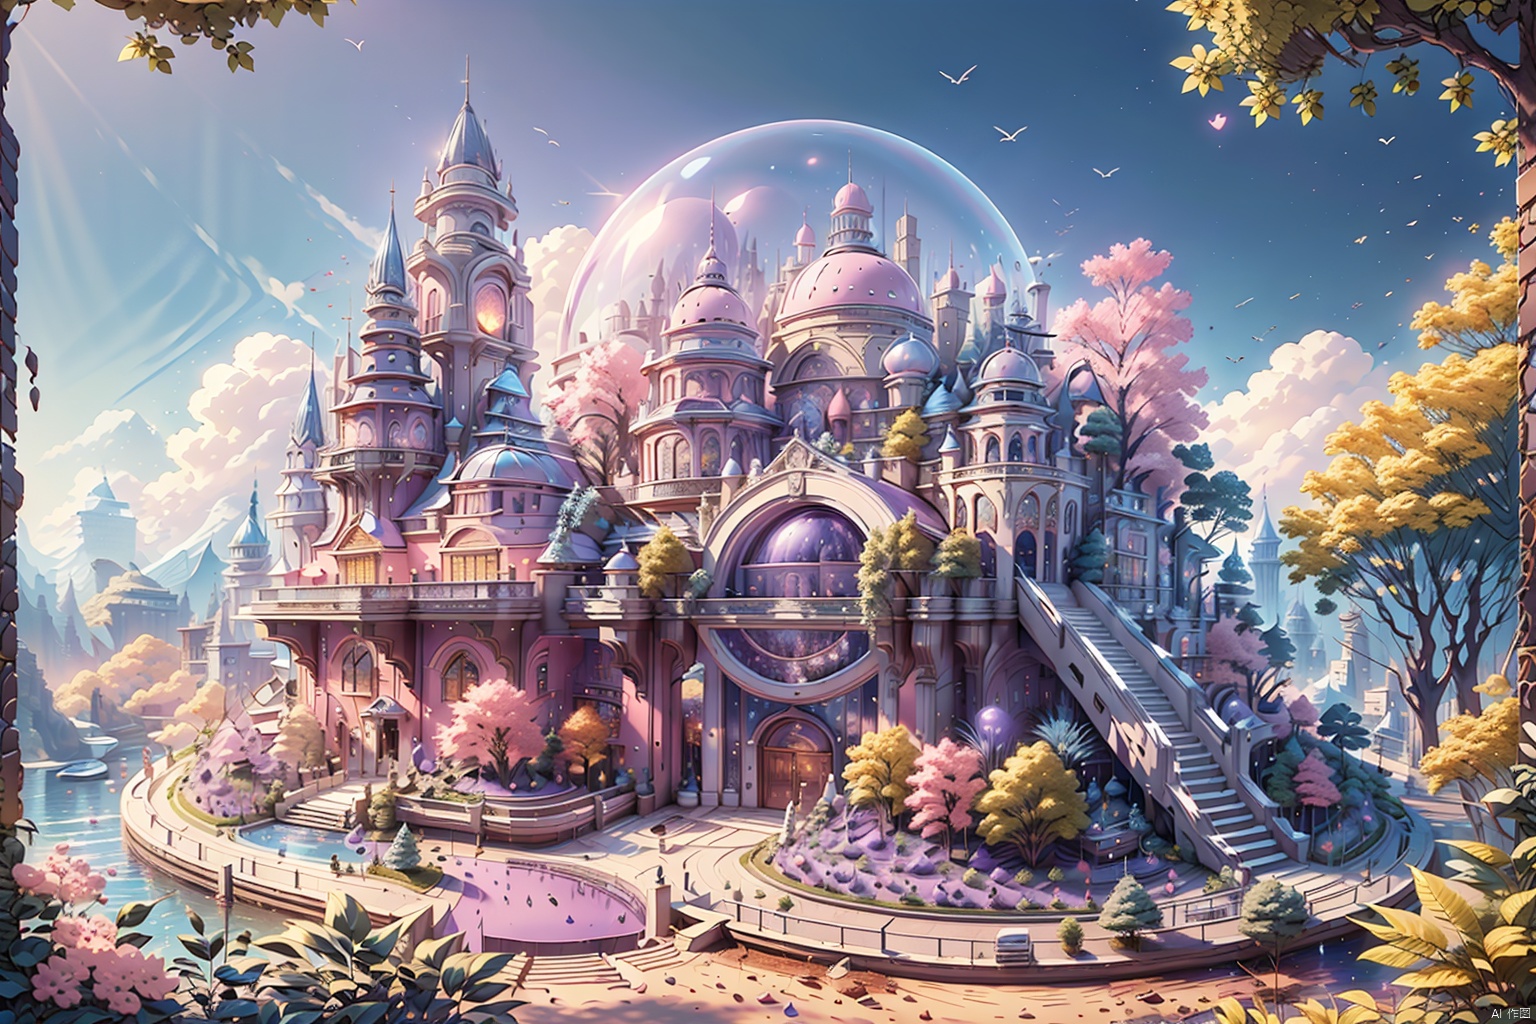 Dream, cake castle, (pink, purple, white), brick-like texture design, chocolate chips, icing, chocolate chains, exquisite windows and doors, beautiful textures, gardens, trees, shrubs, 8k, high quality, top CG, highest picture quality, best work, movie lighting, cool lighting effects, special effects, masterpieces, best quality, extreme details, illustrations, ultra-high definition, ultra-fine sections, 8k resolution, ultra-high resolution, best picture quality, high detail, master level, detail level